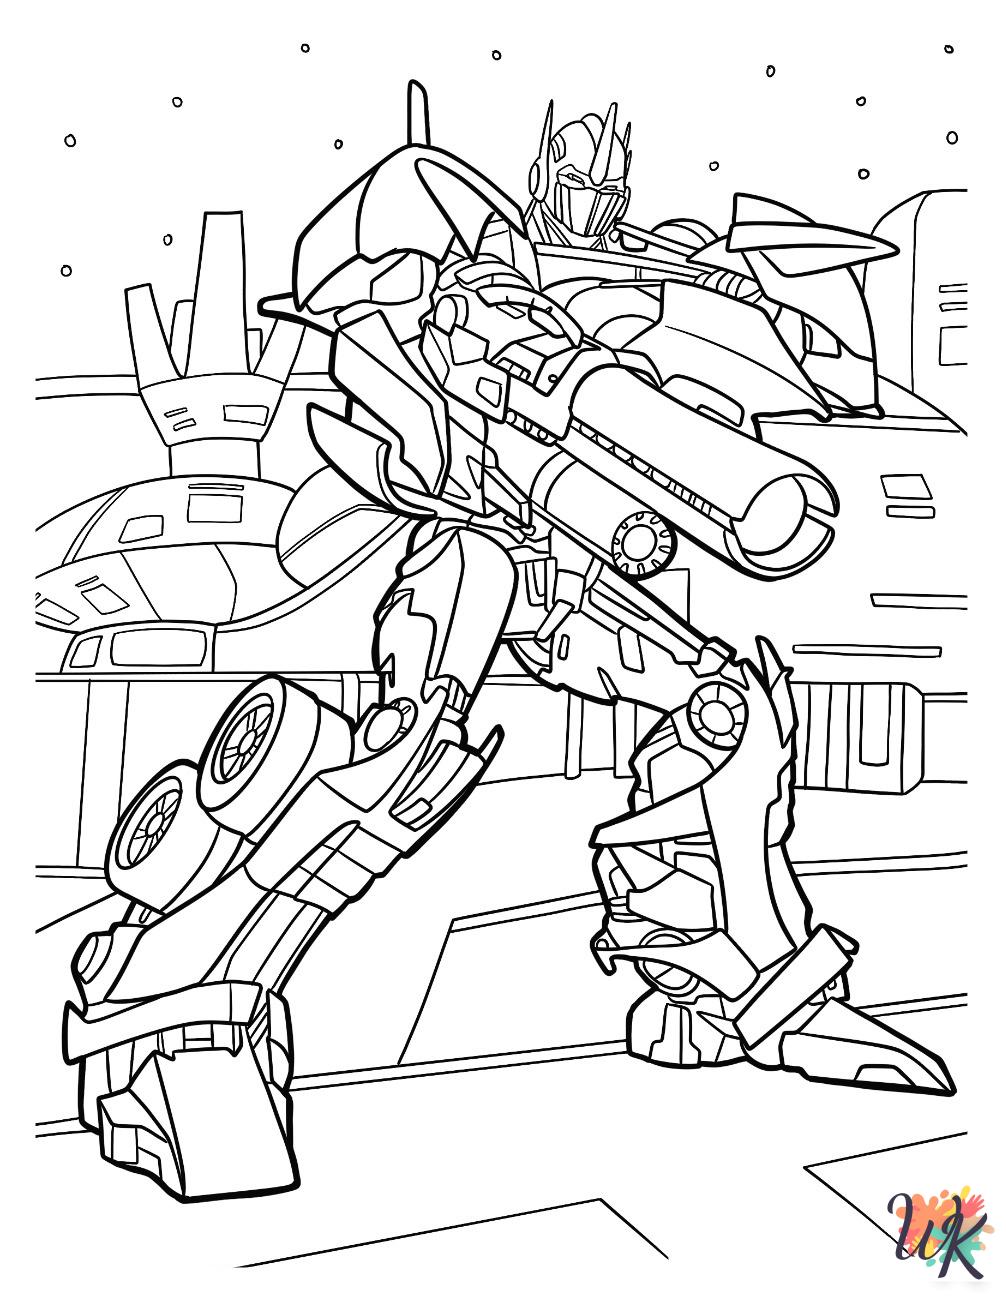 Optimus Prime themed coloring pages